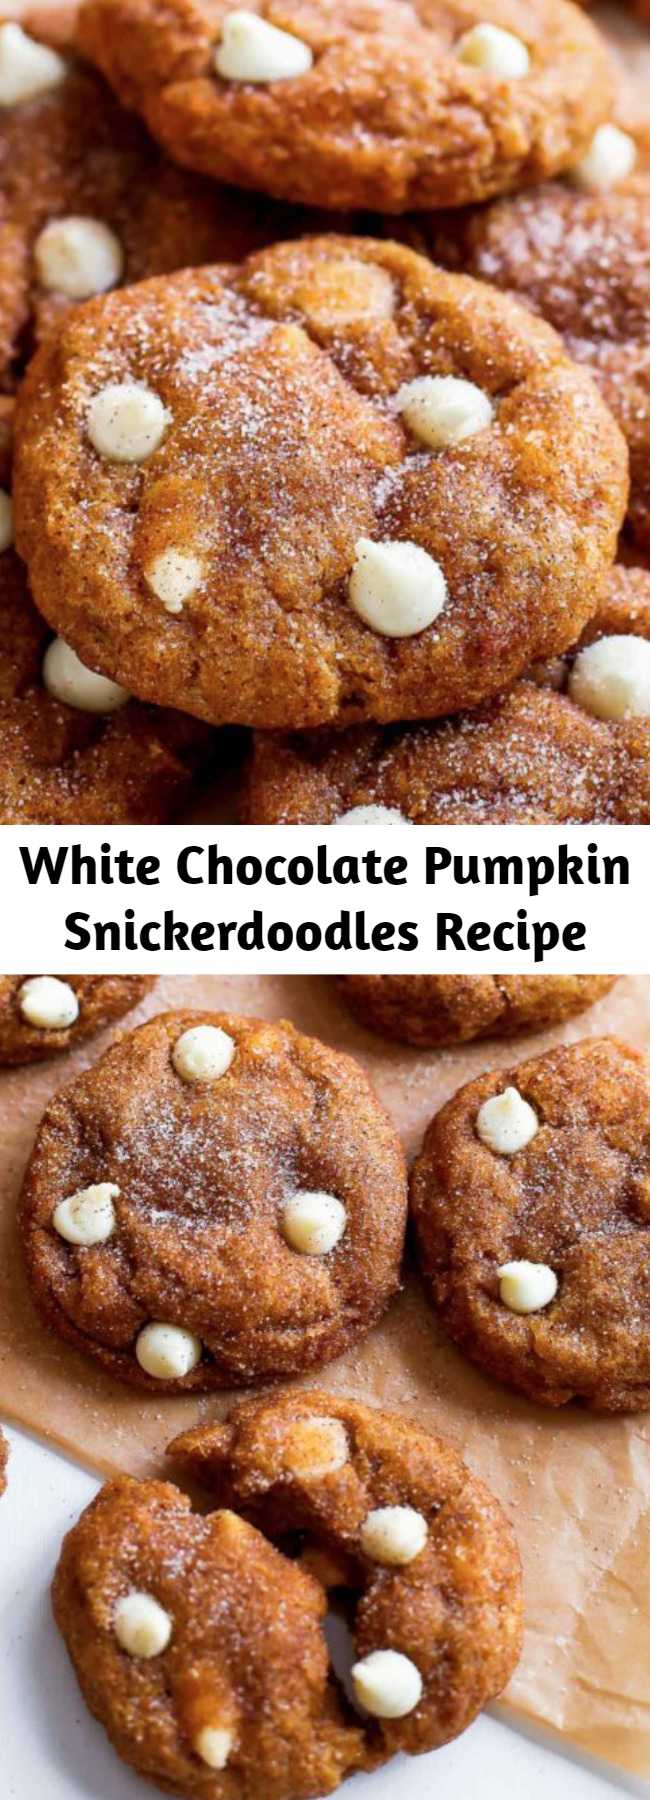 White Chocolate Pumpkin Snickerdoodles Recipe - These soft & chewy snickerdoodle cookies are full of pumpkin, white chocolate, and cinnamon sugar. Everything you love about snickerdoodle cookies and pumpkin pie in one. Warning: they disappear quickly, so make a double batch!